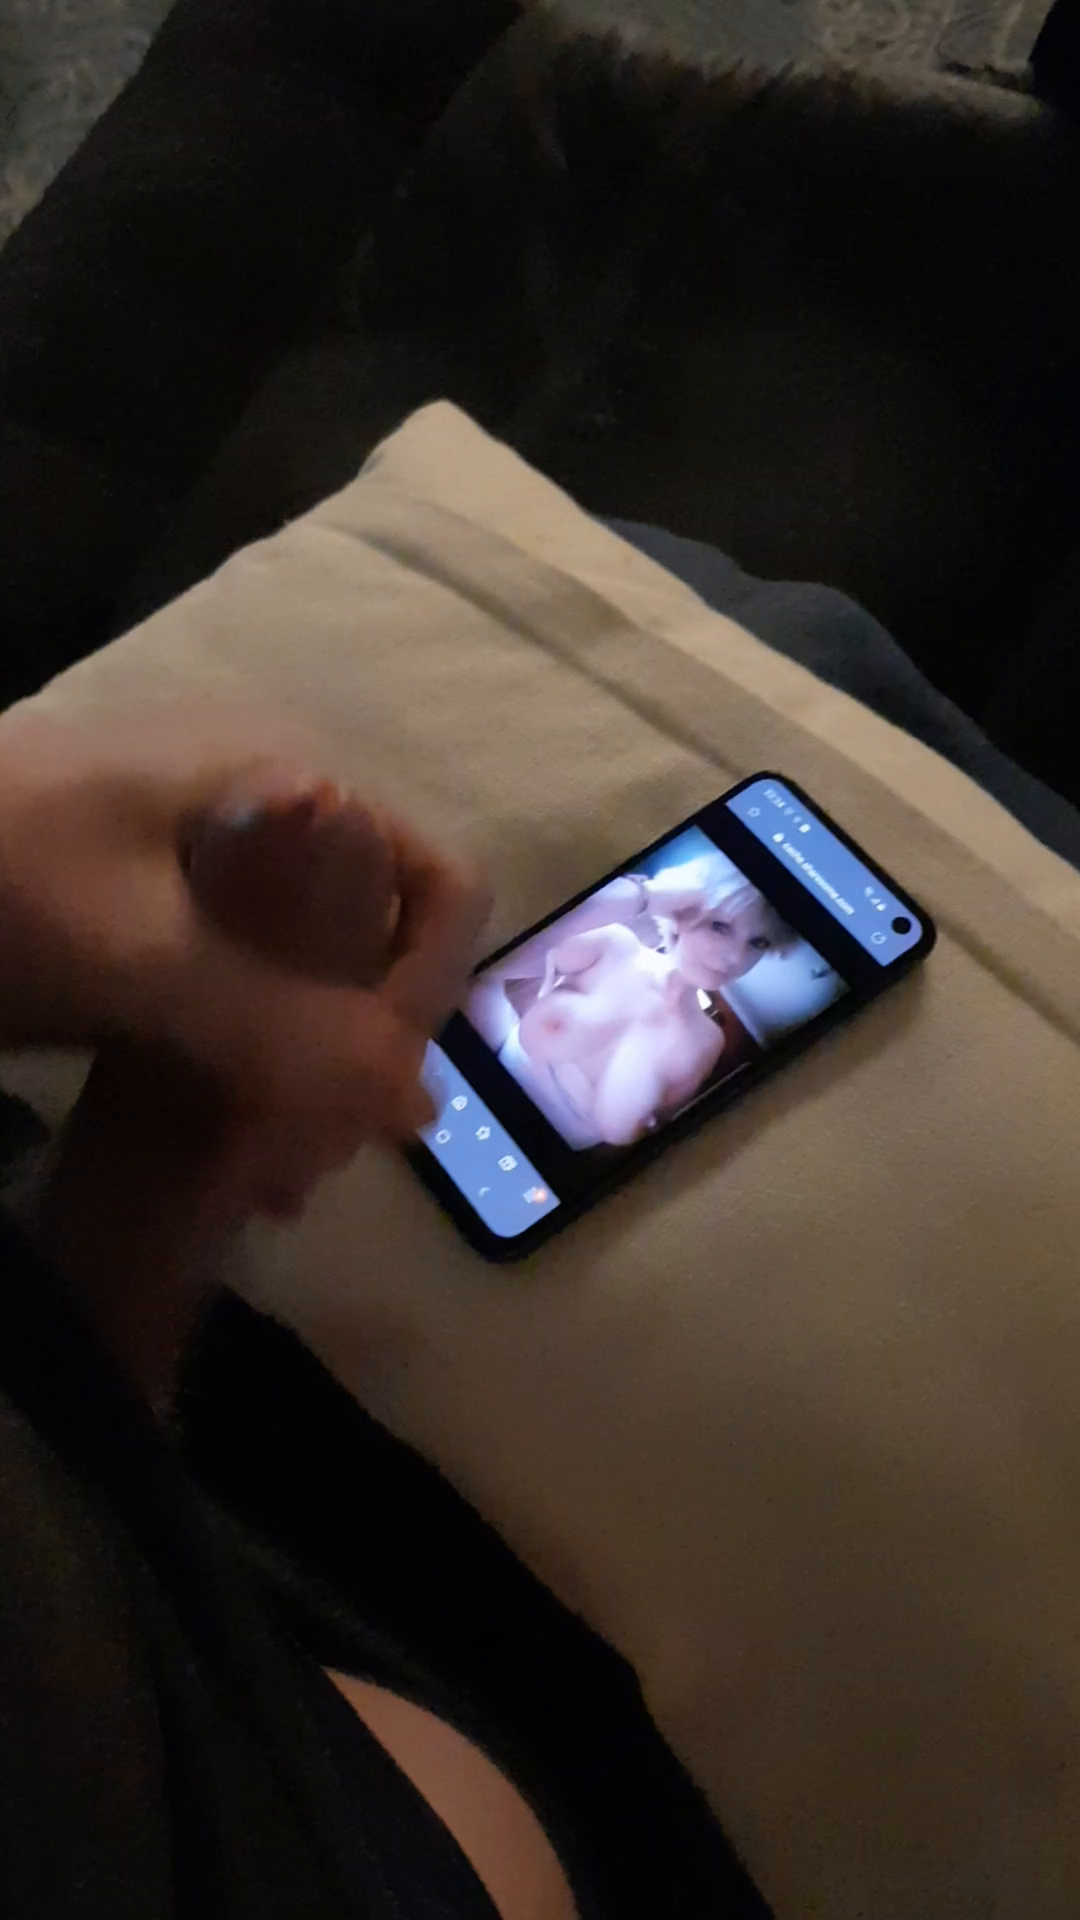 Watch the Video by Hwyljones with the username @Hwyljones, posted on November 24, 2019. The post is about the topic Cum tributes. and the text says '@missterri you make me so hard I was dripping with precum just looking at your tits, make me something special to watch me cum all over you 😍😍'